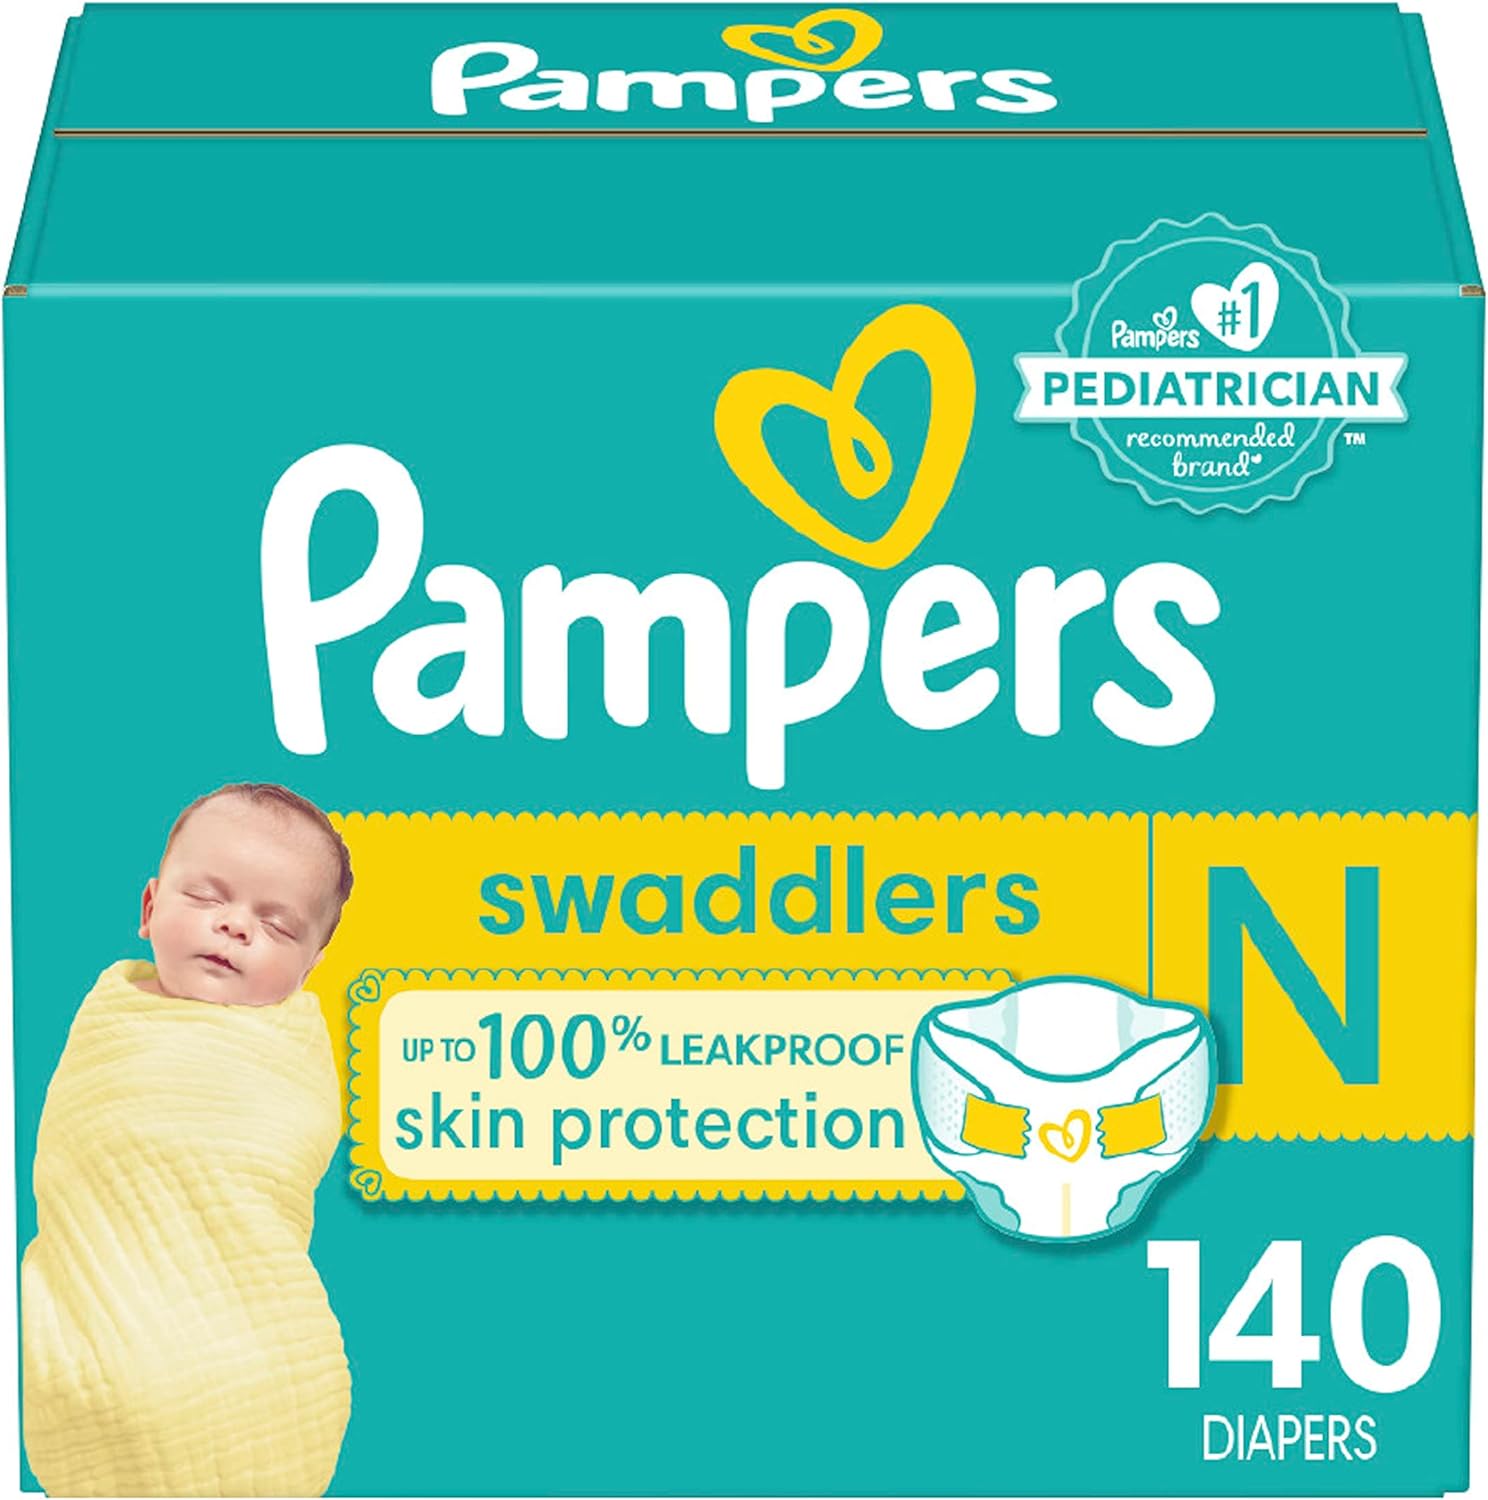 Pampers Swaddlers Newborn Diapers – Size 0, 140 Count, Ultra Soft Disposable Baby Diapers